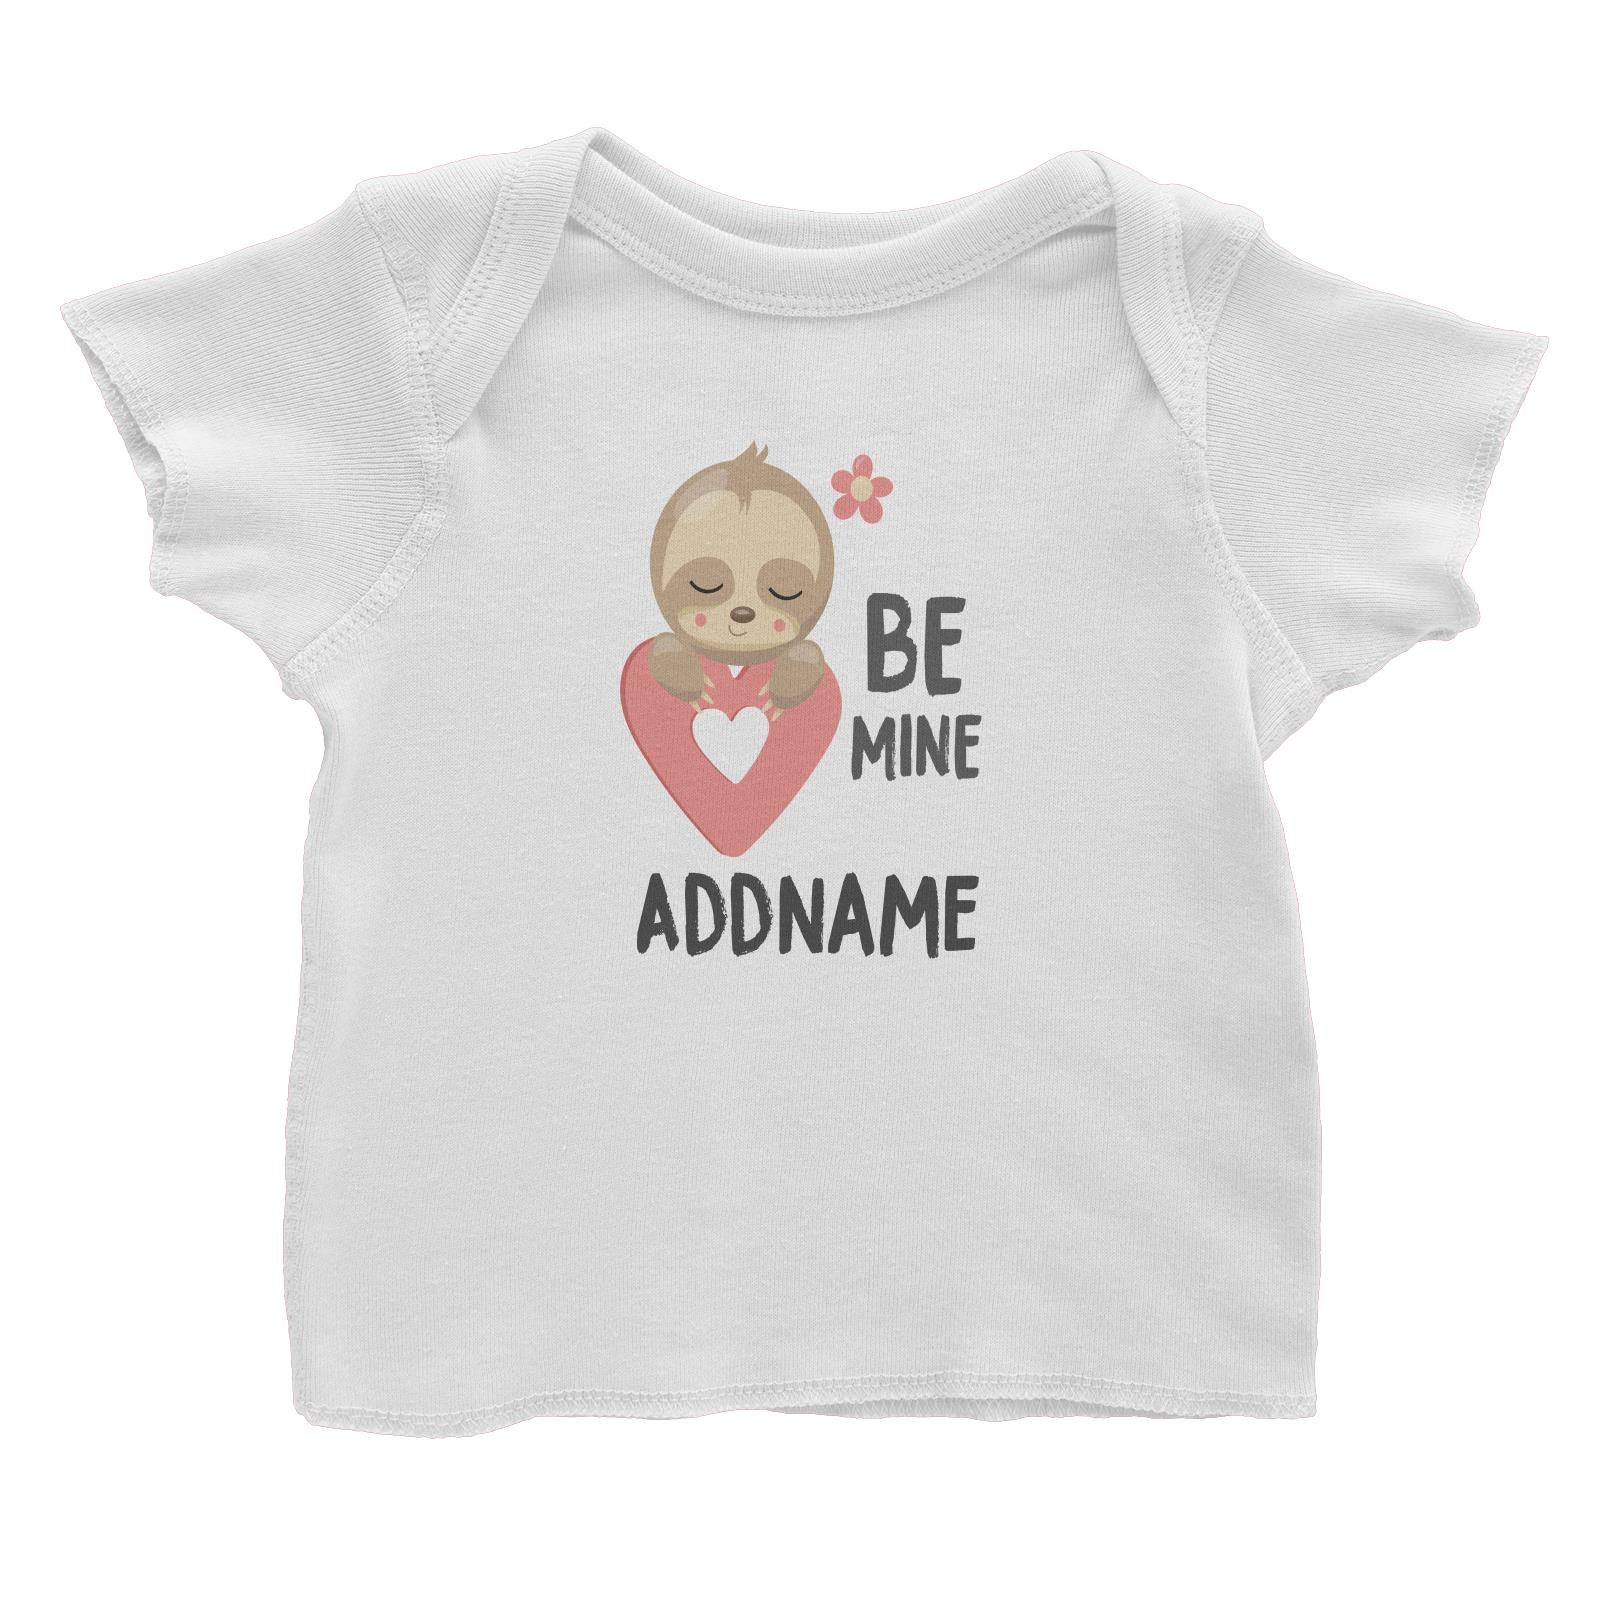 Cute Sloth Be Mine with Heart Addname Baby T-Shirt